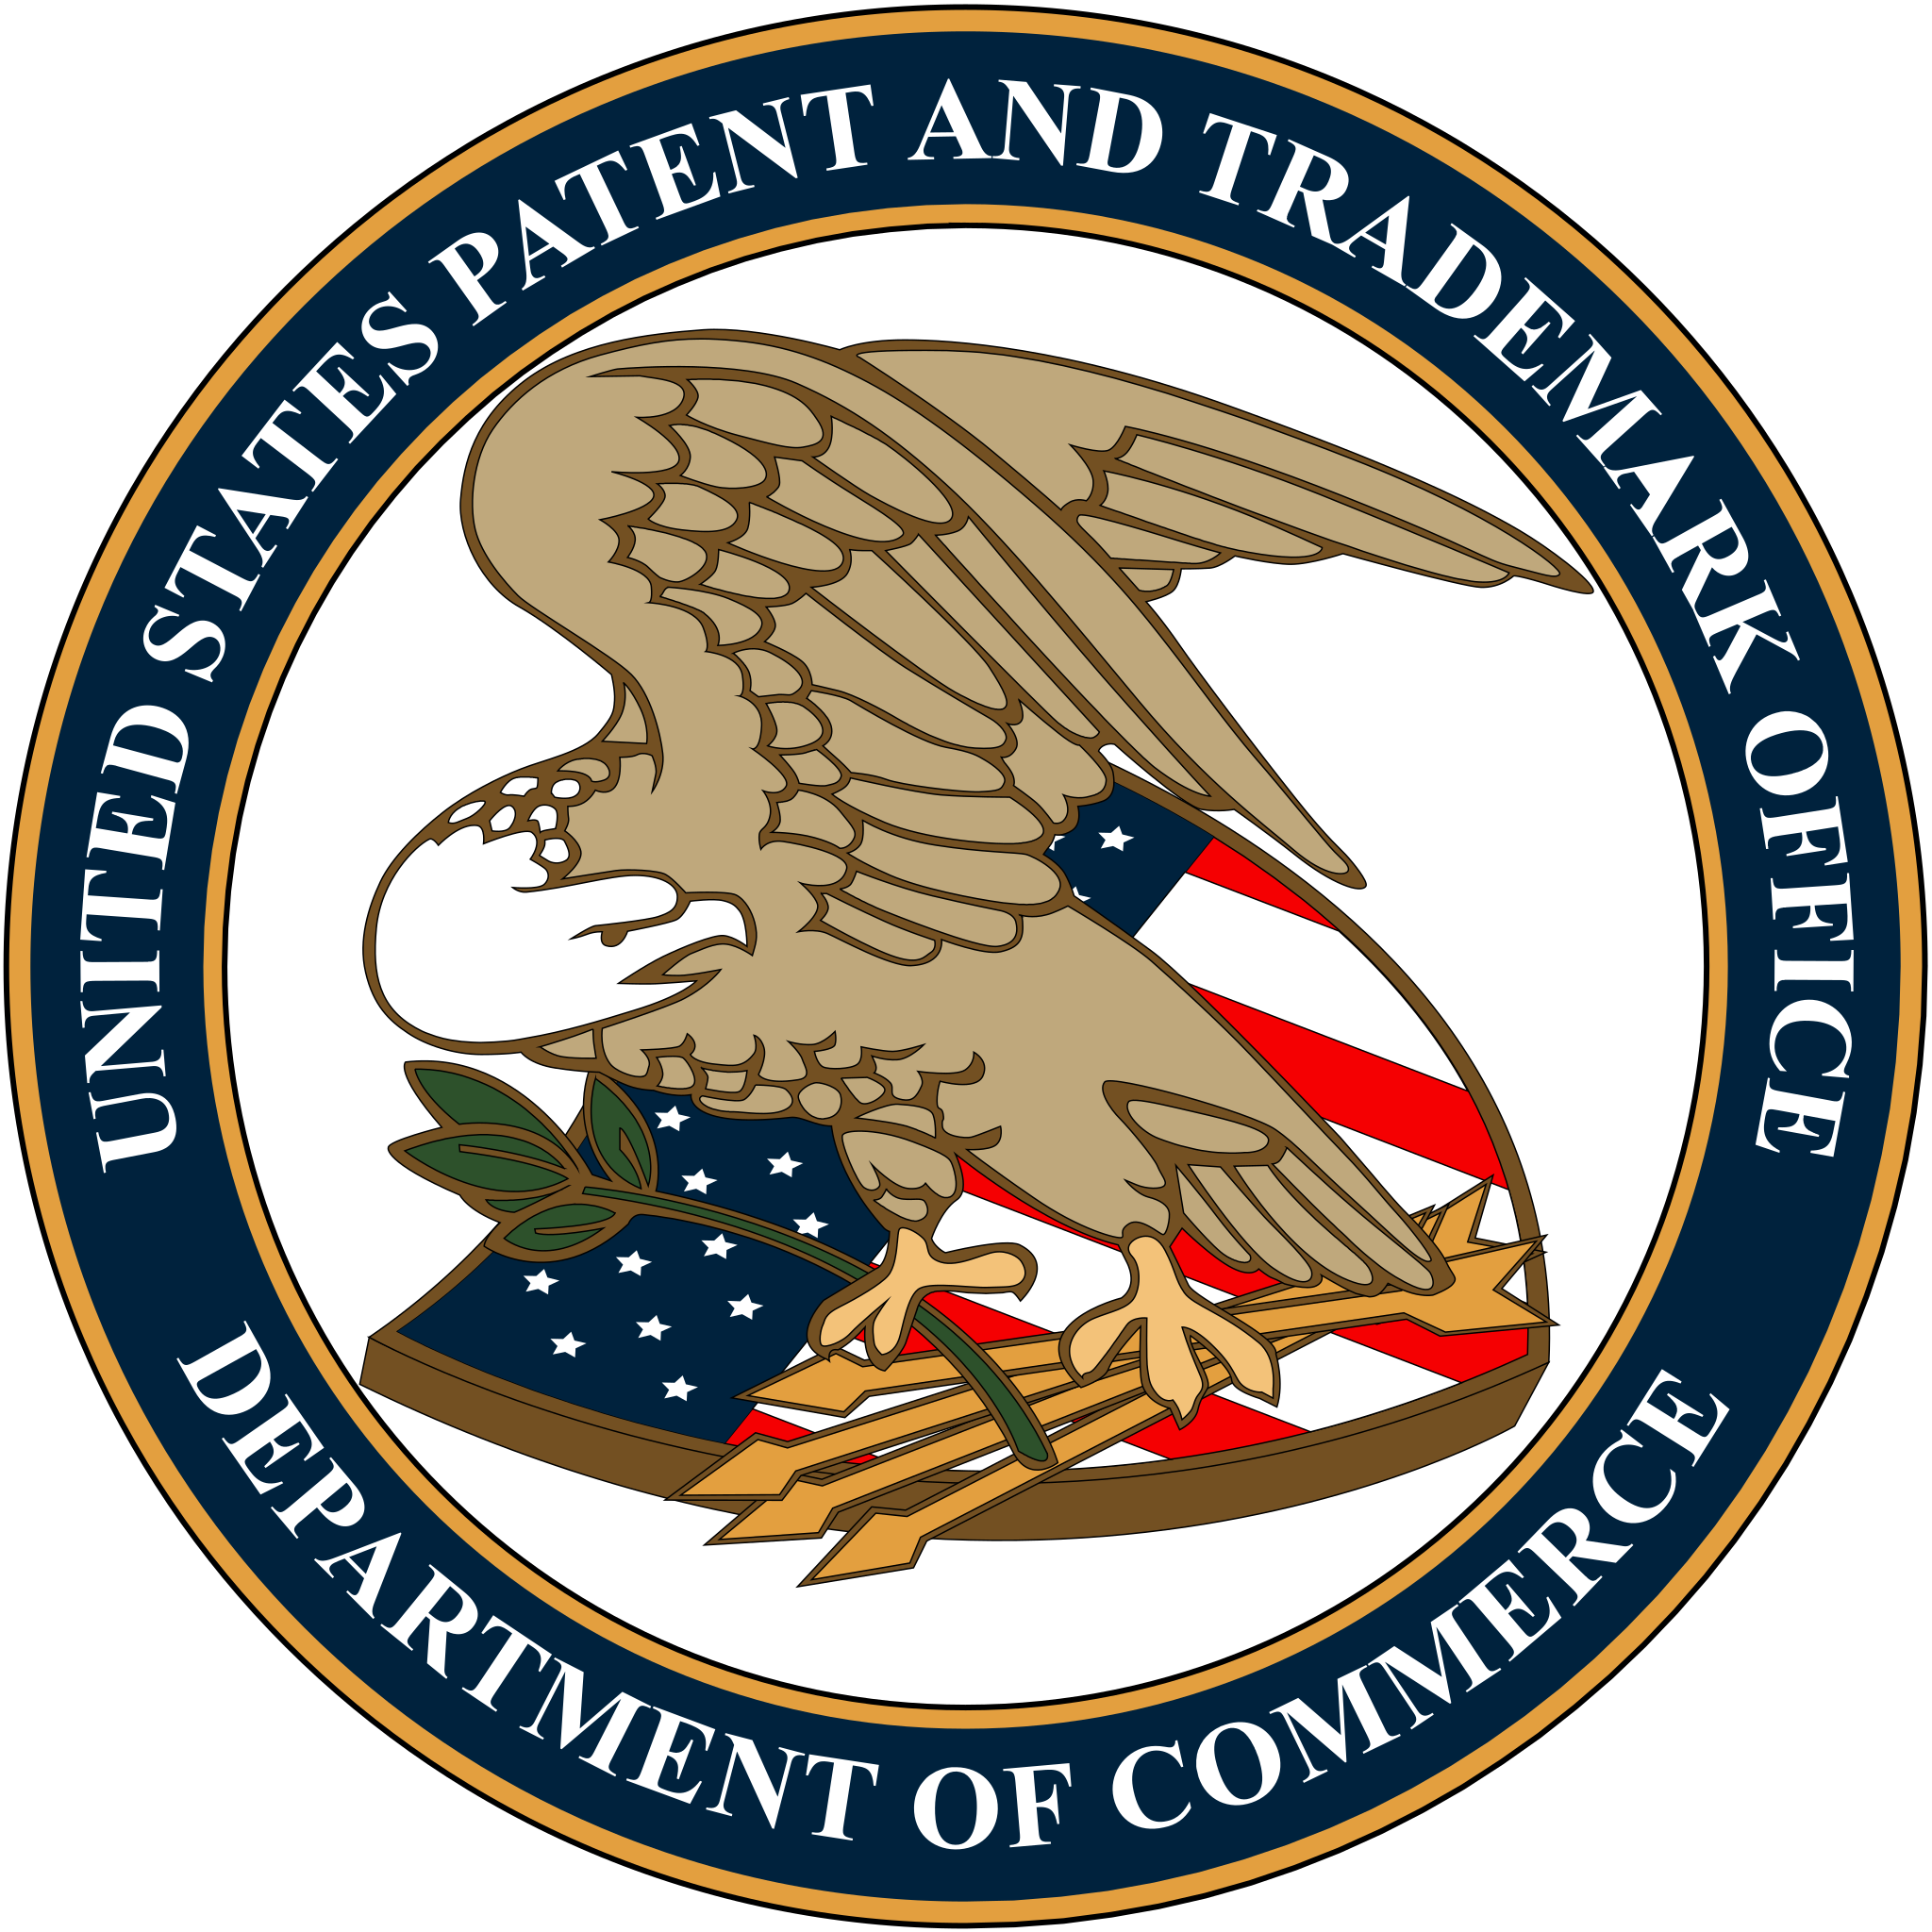 United States Patent and Trademark Office logo